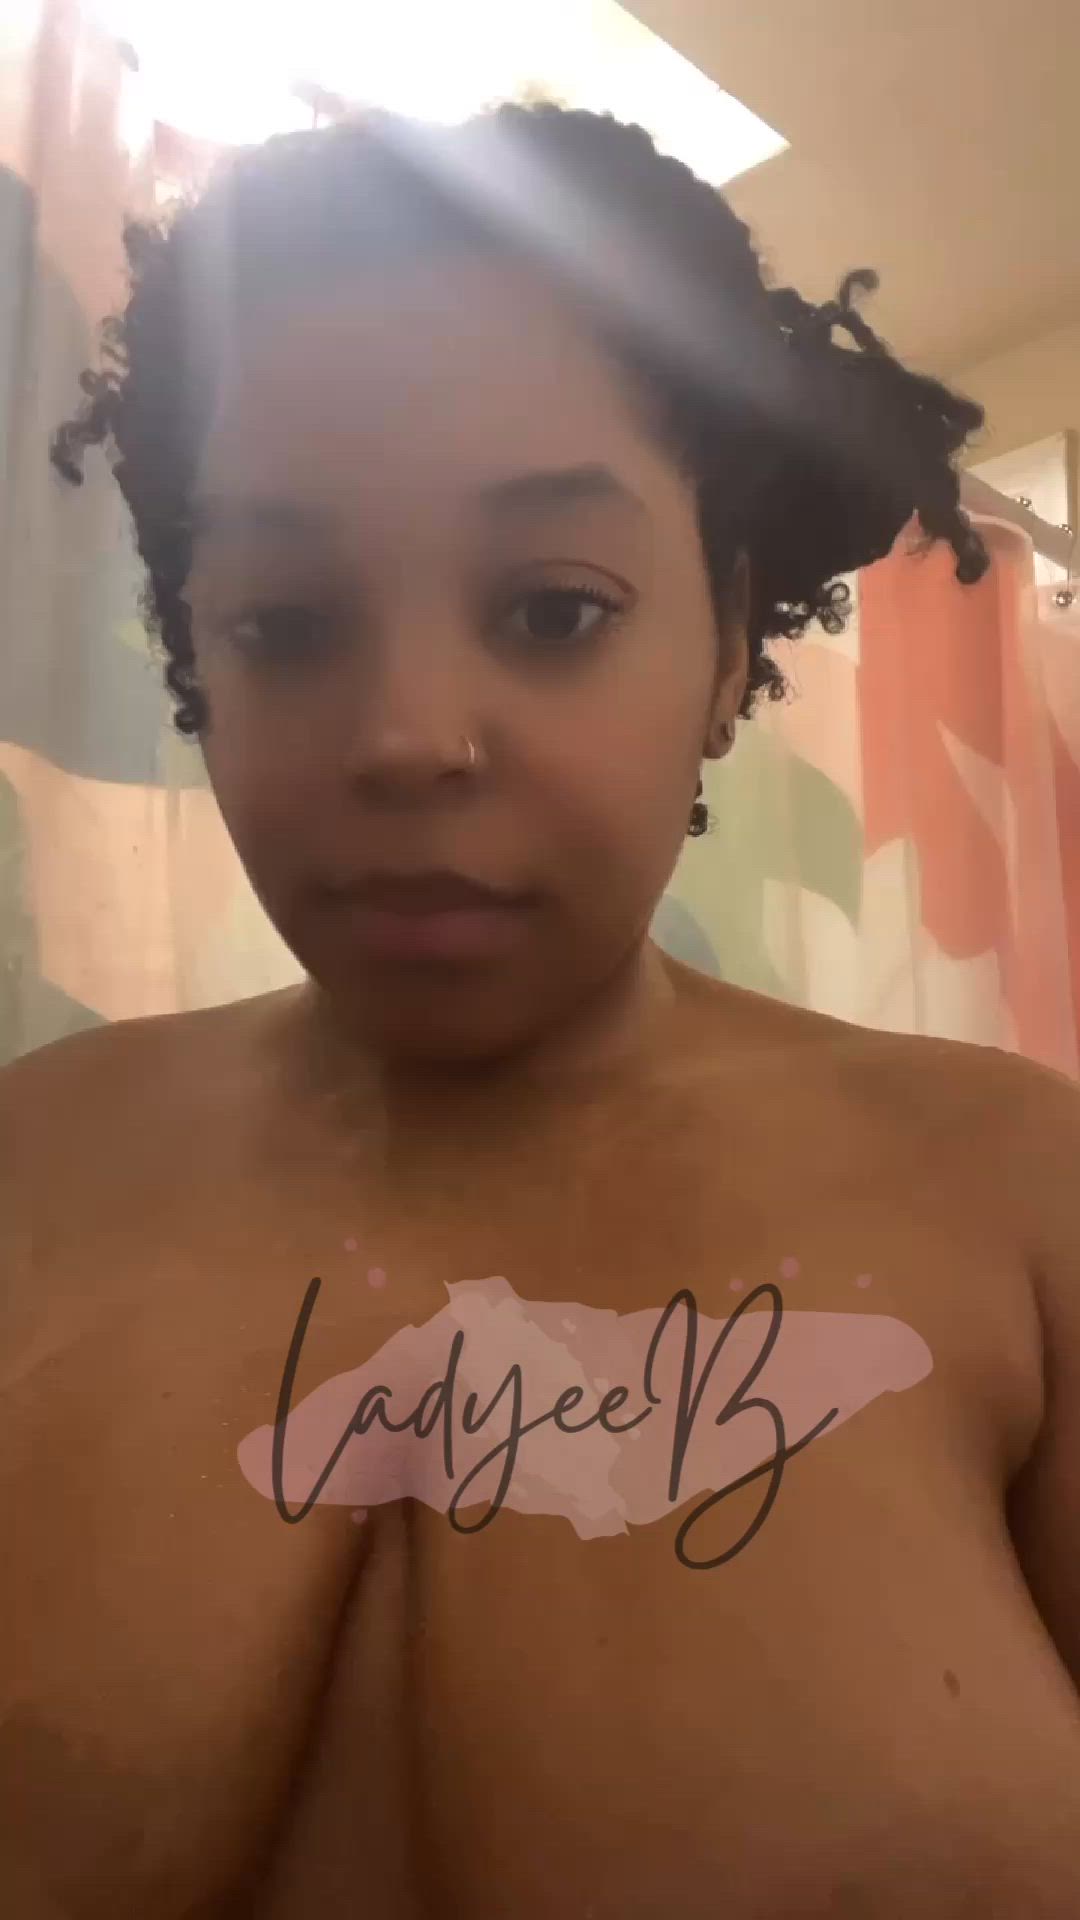 Big Tits porn video with onlyfans model Ladyeeb <strong>@ladyeeb</strong>